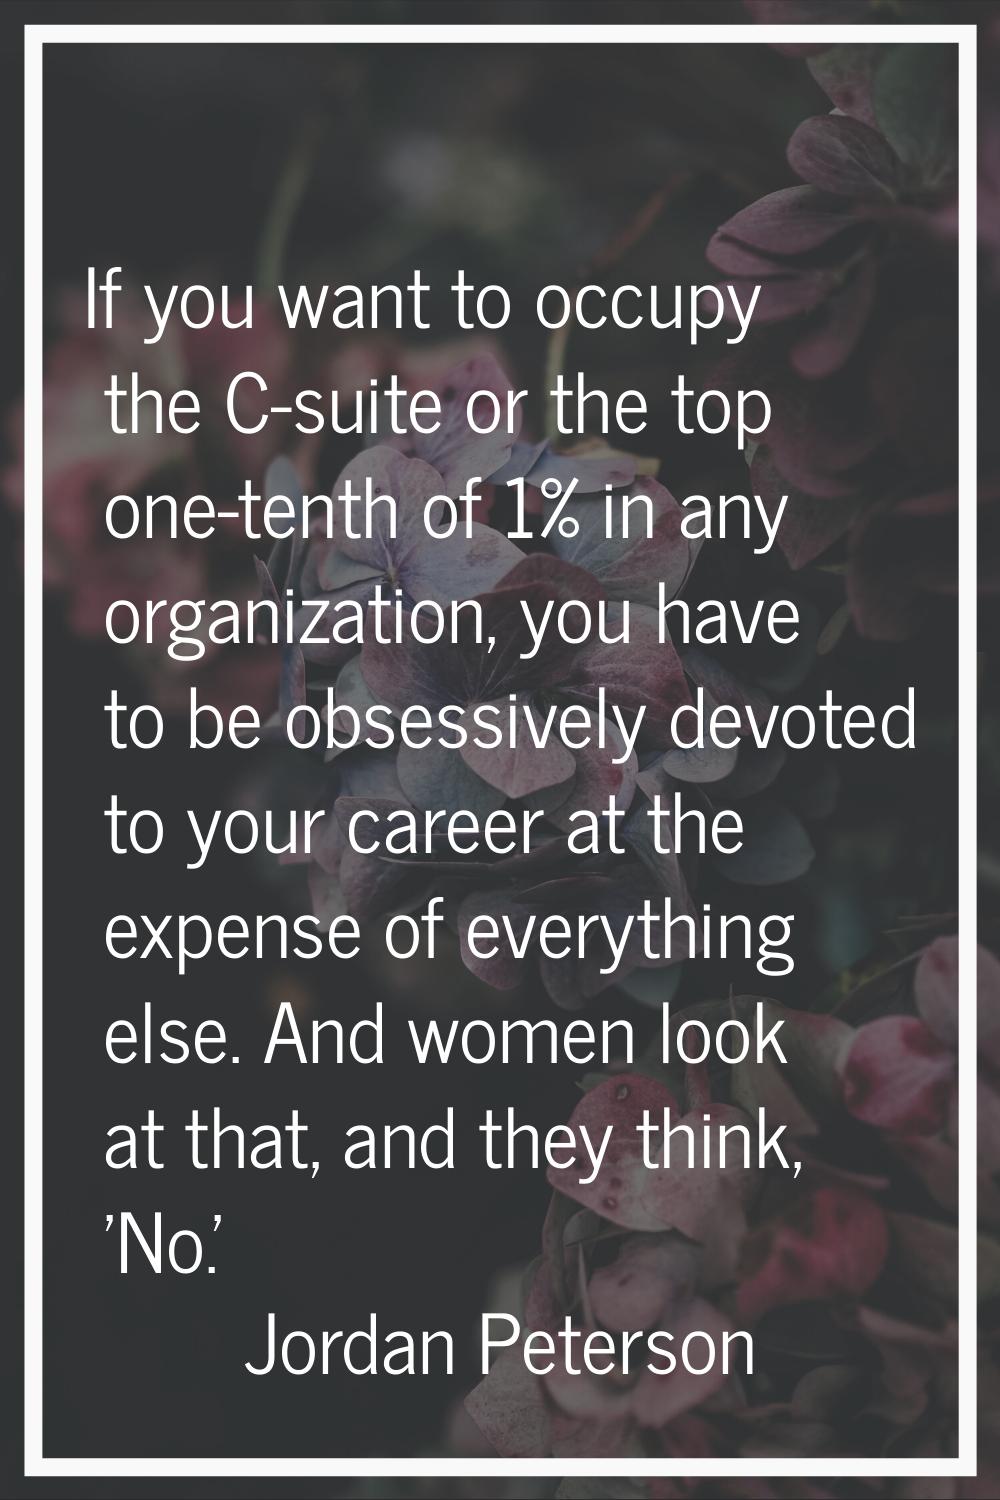 If you want to occupy the C-suite or the top one-tenth of 1% in any organization, you have to be ob